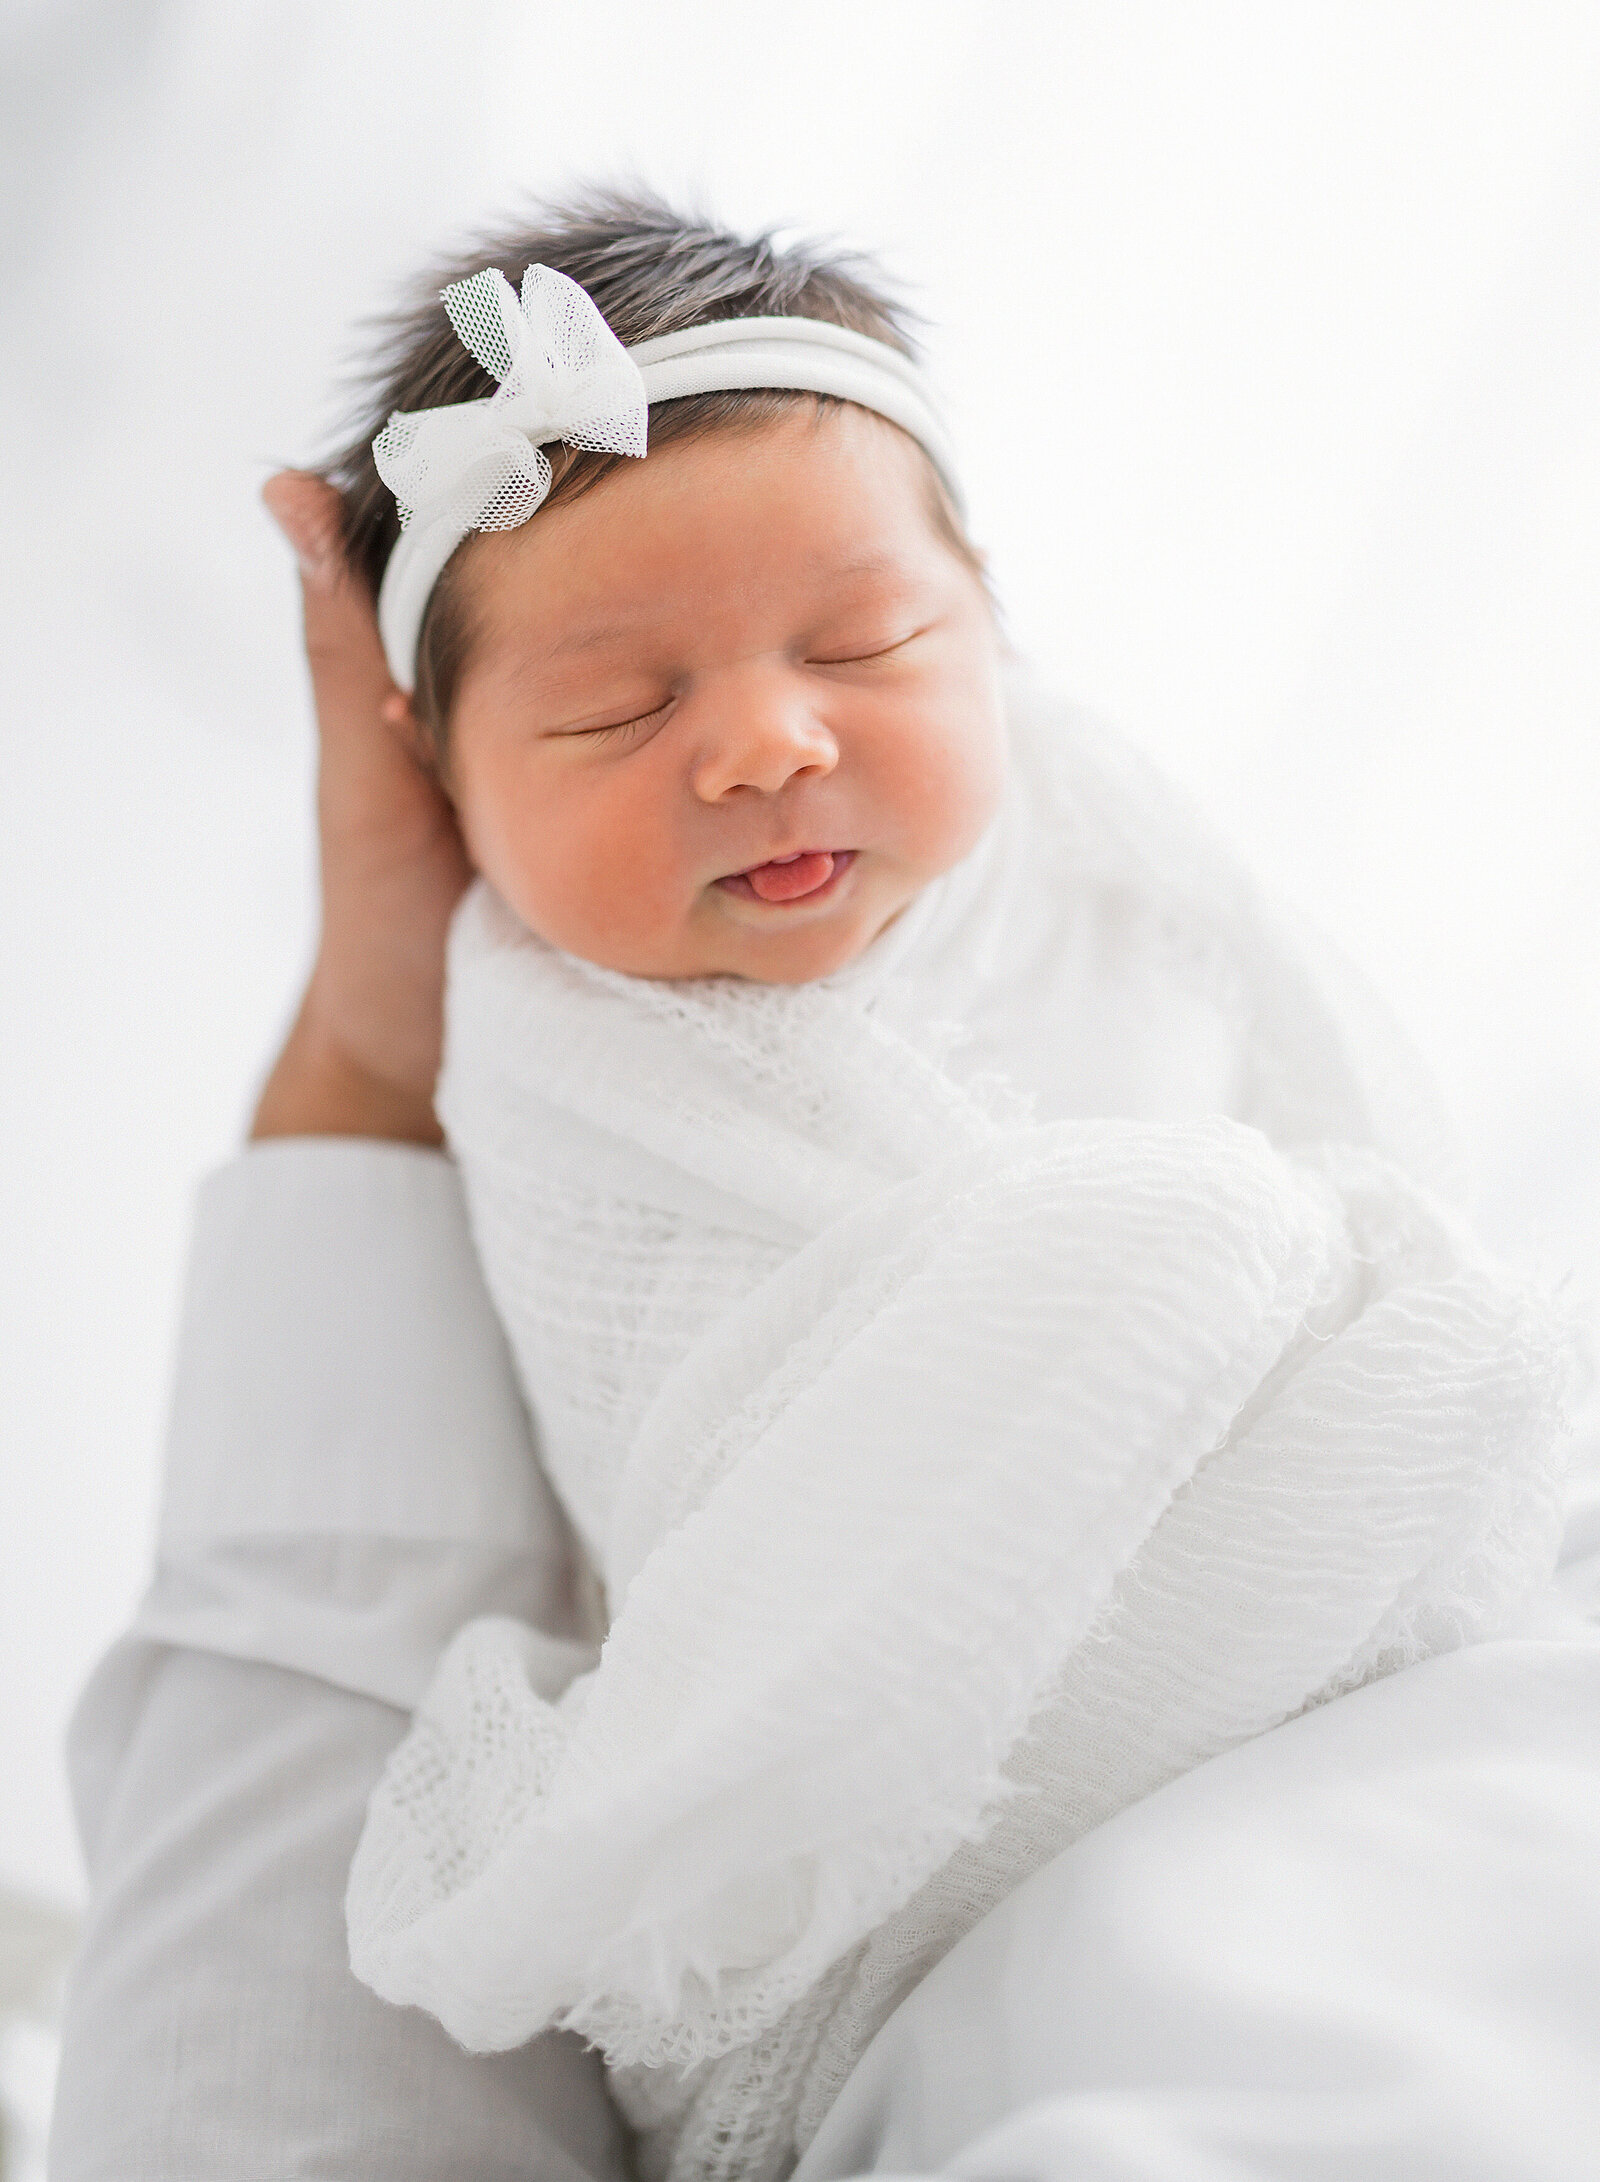 newborn wrapped in white wrap sticking out her tongue